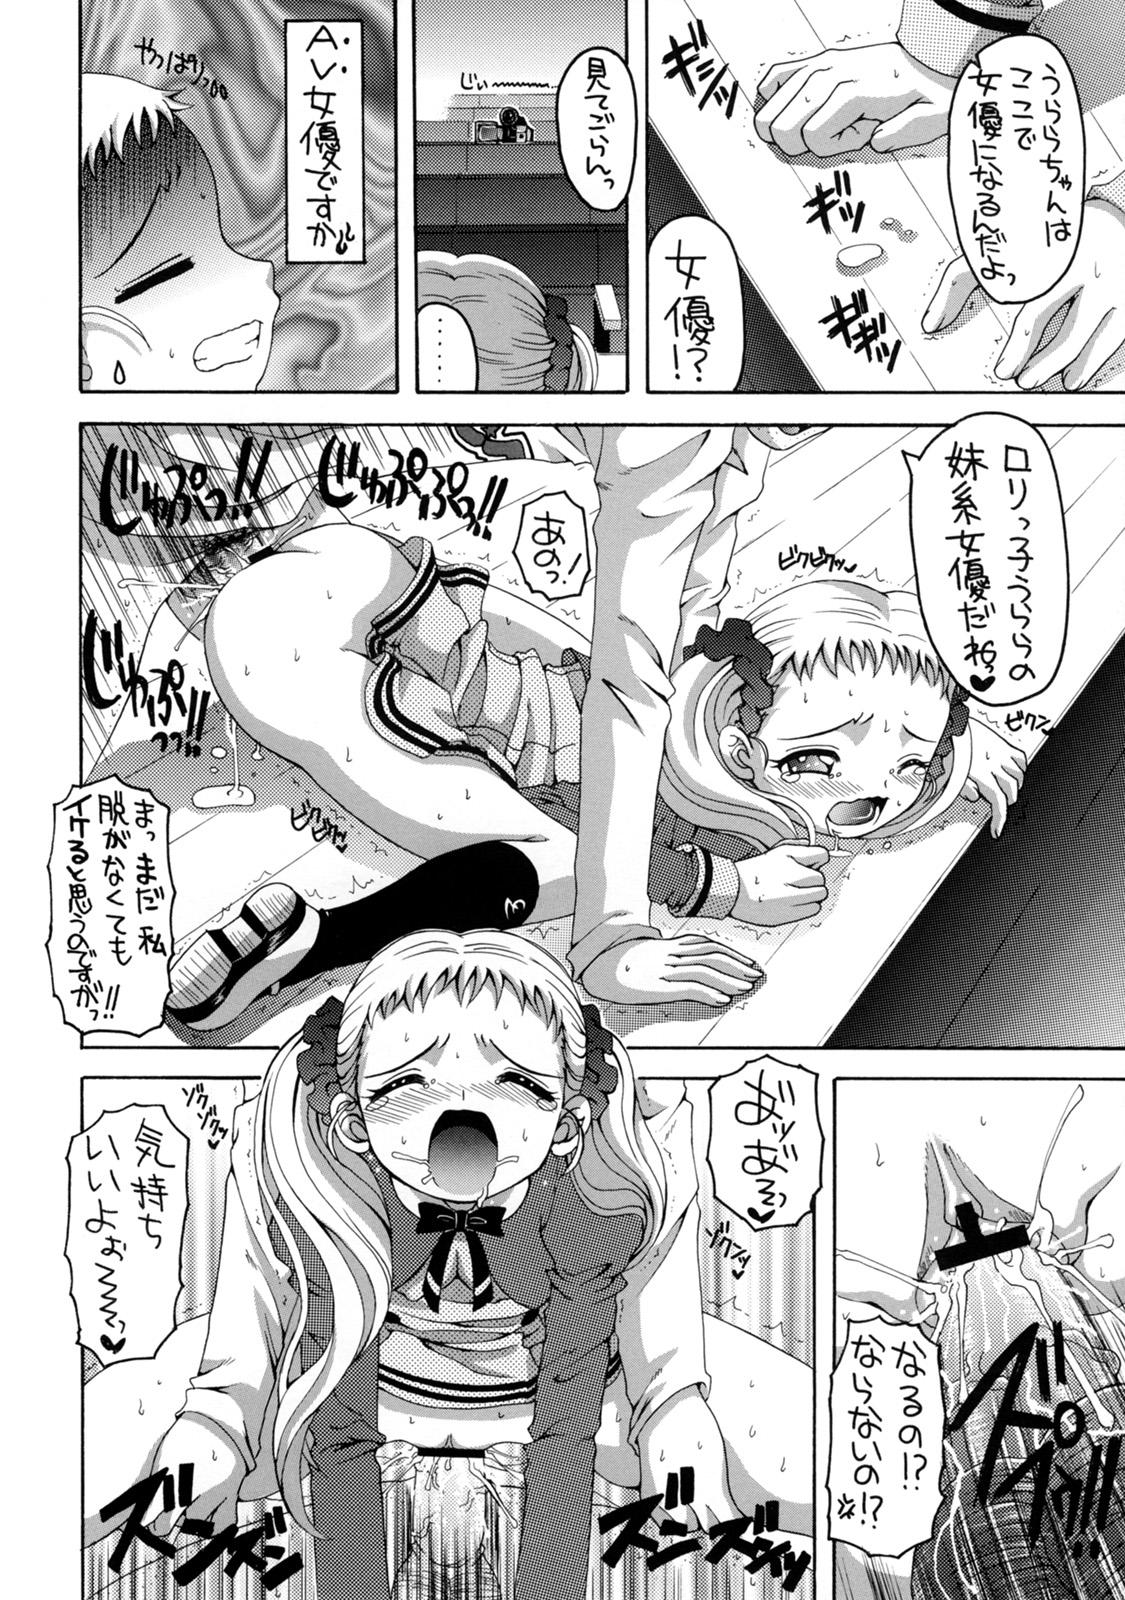 Seduction Porn Yes! Five 3 - Pretty cure Yes precure 5 Exotic - Page 11